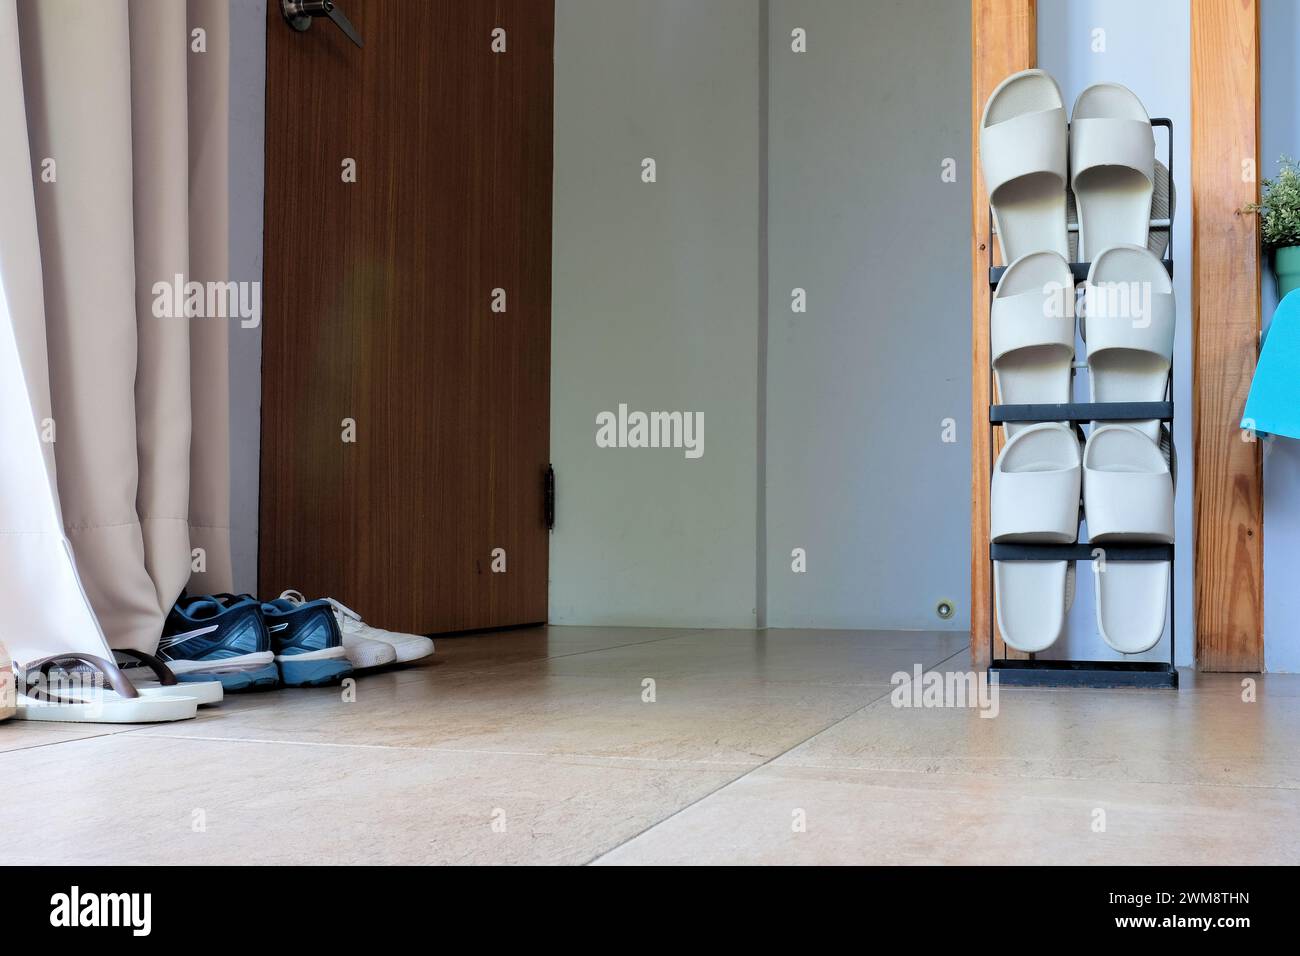 Vertical shoe rack holding three pairs of rubber sandals for use indoors located next to door and entryway with outdoor shoes on floor; Asia, Taiwan. Stock Photo